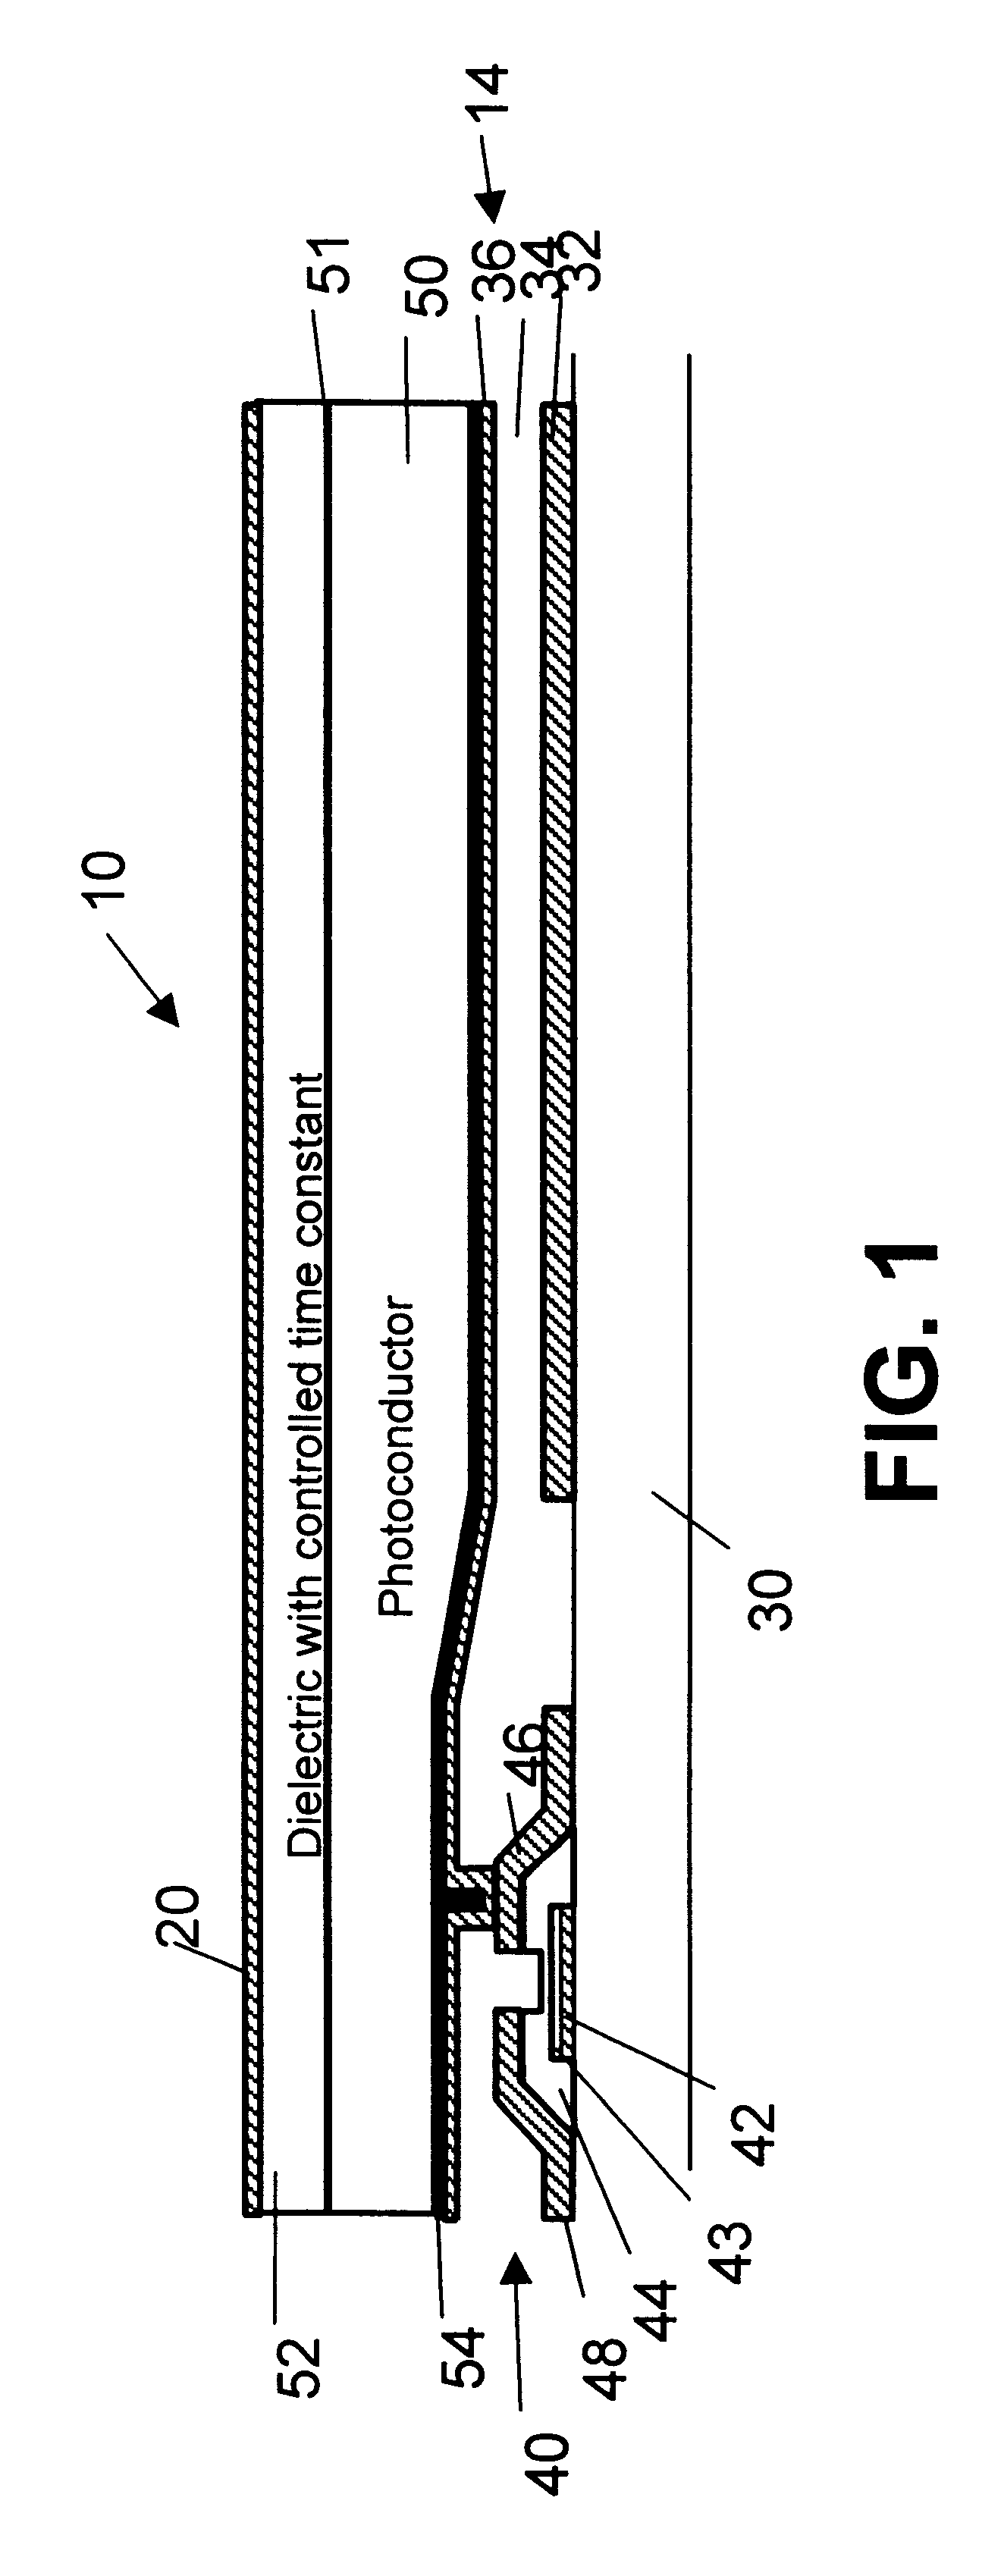 Direct radiographic imaging panel having a dielectric layer with an adjusted time constant